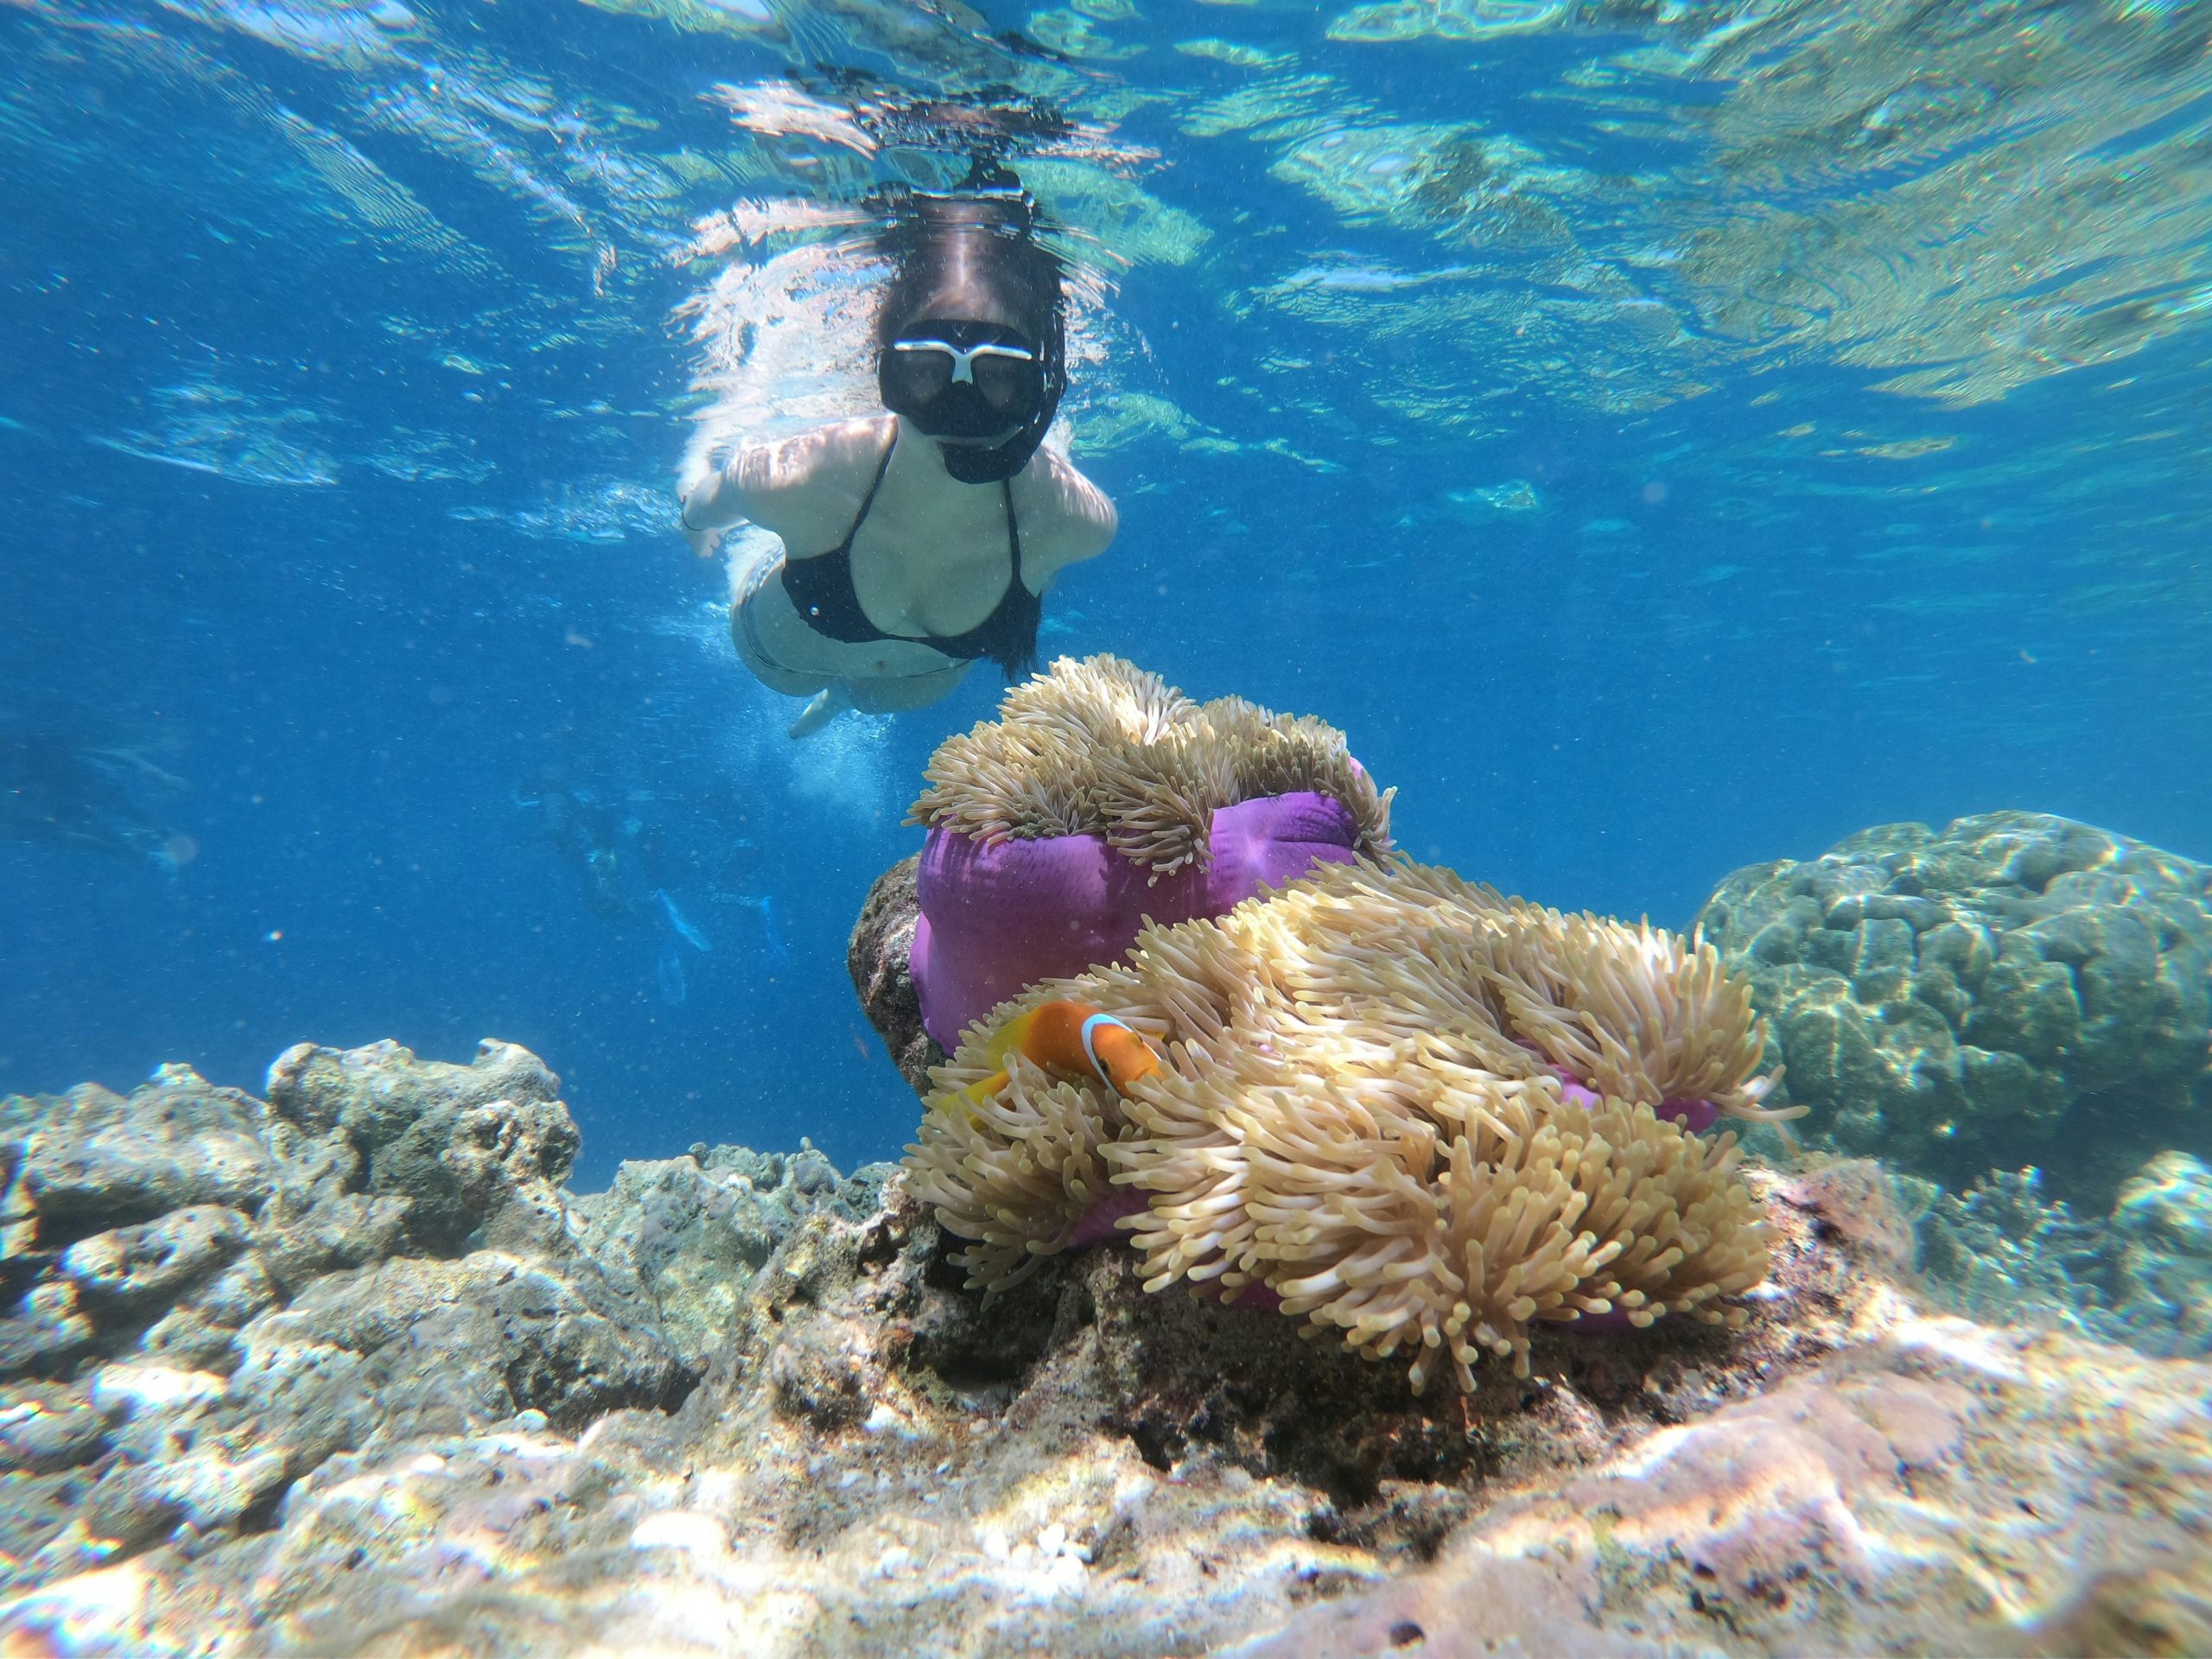 discover the beauty of the underwater world with snorkeling - an adventure for all ages and swimming abilities. explore vibrant marine life and stunning coral reefs in some of the most exotic locations on the planet.